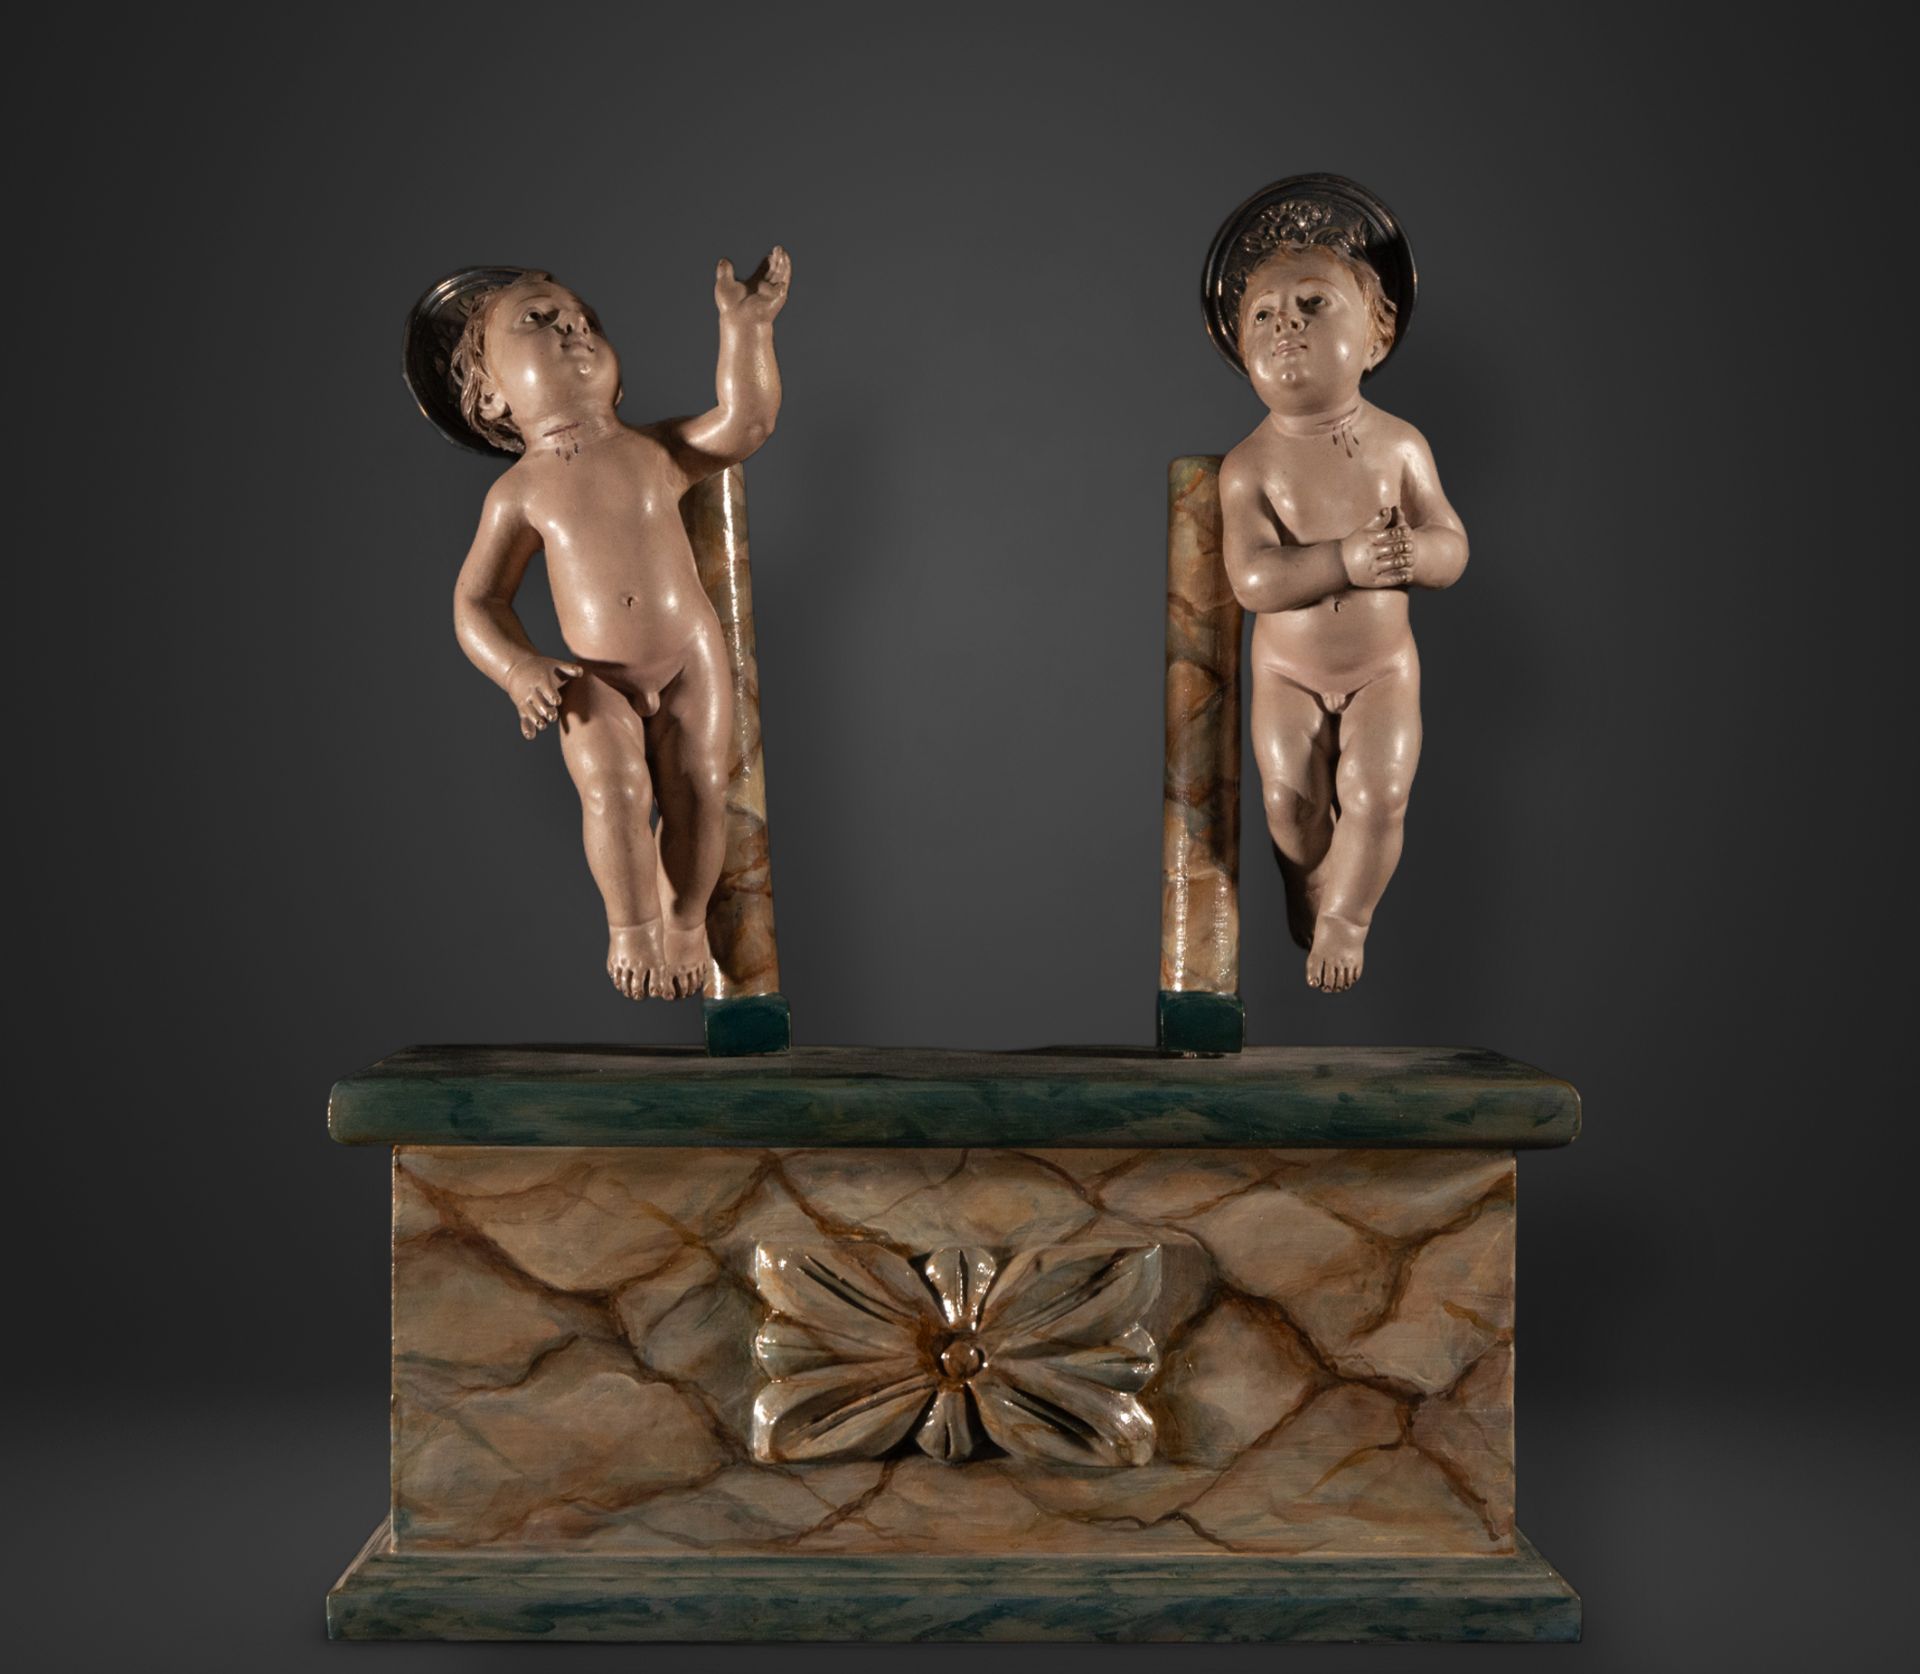 Pair of Neapolitan Holy Children with silver crowns, 18th century, Italy, Naples